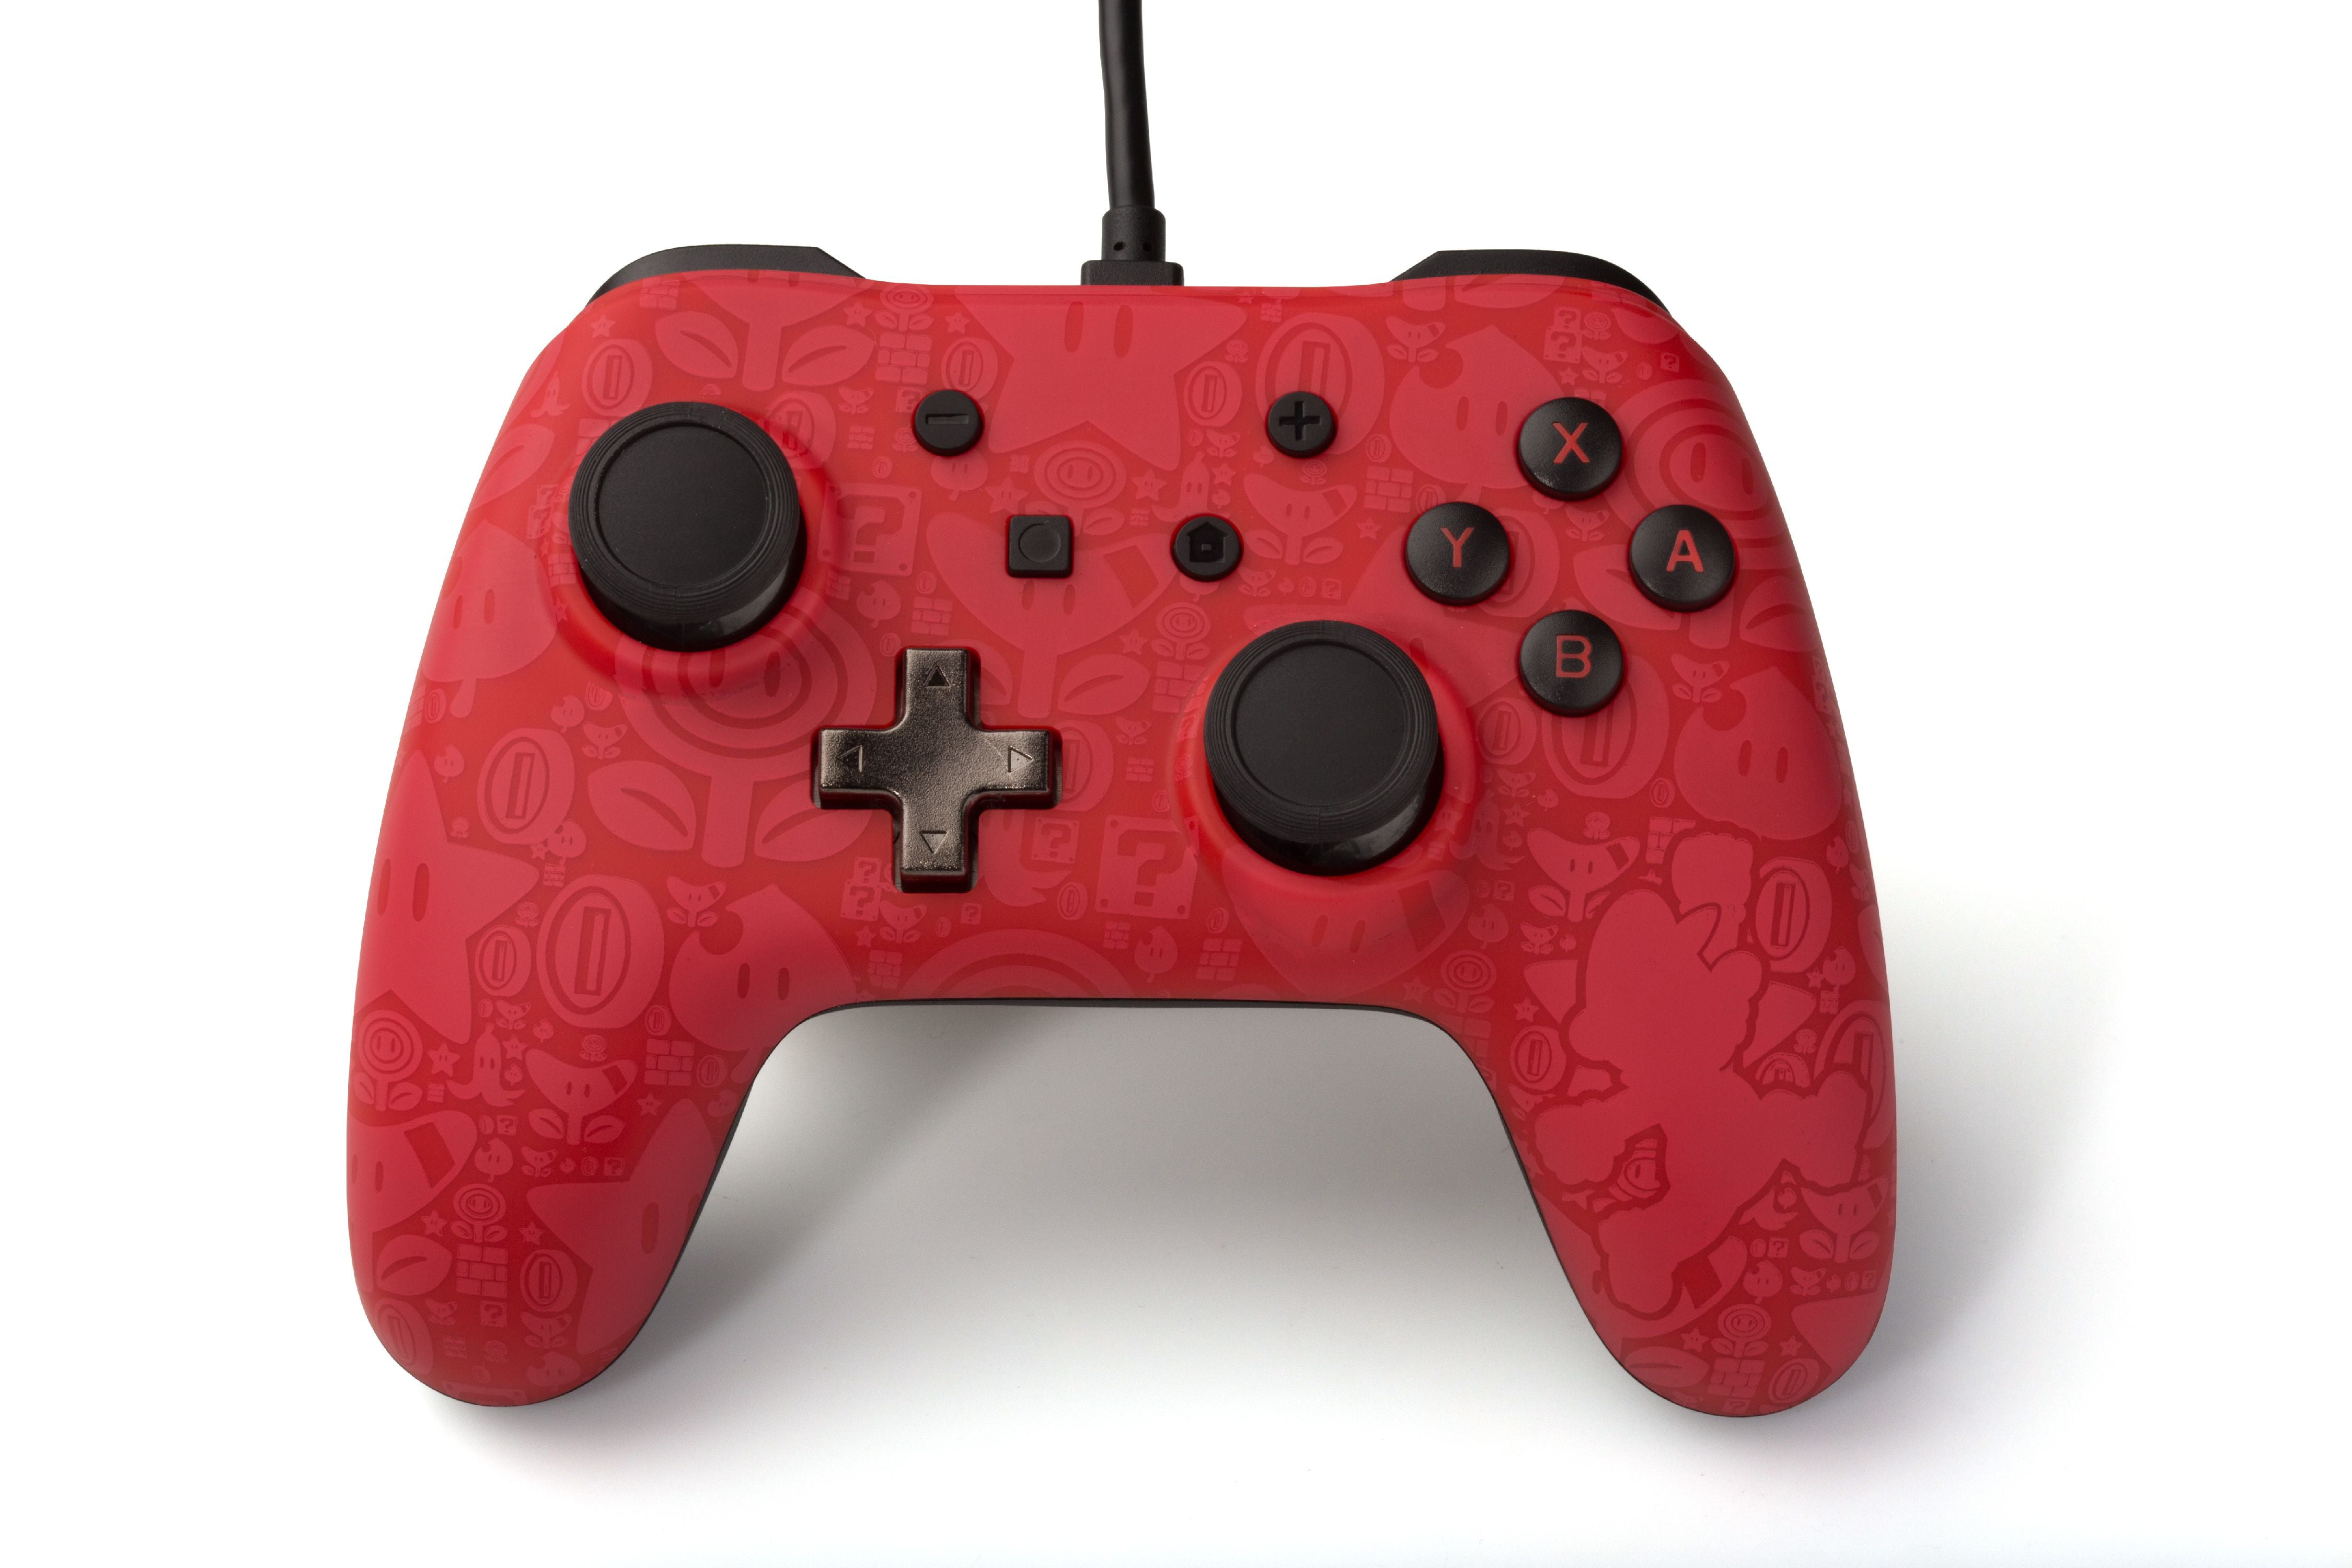 power a wired pro controller